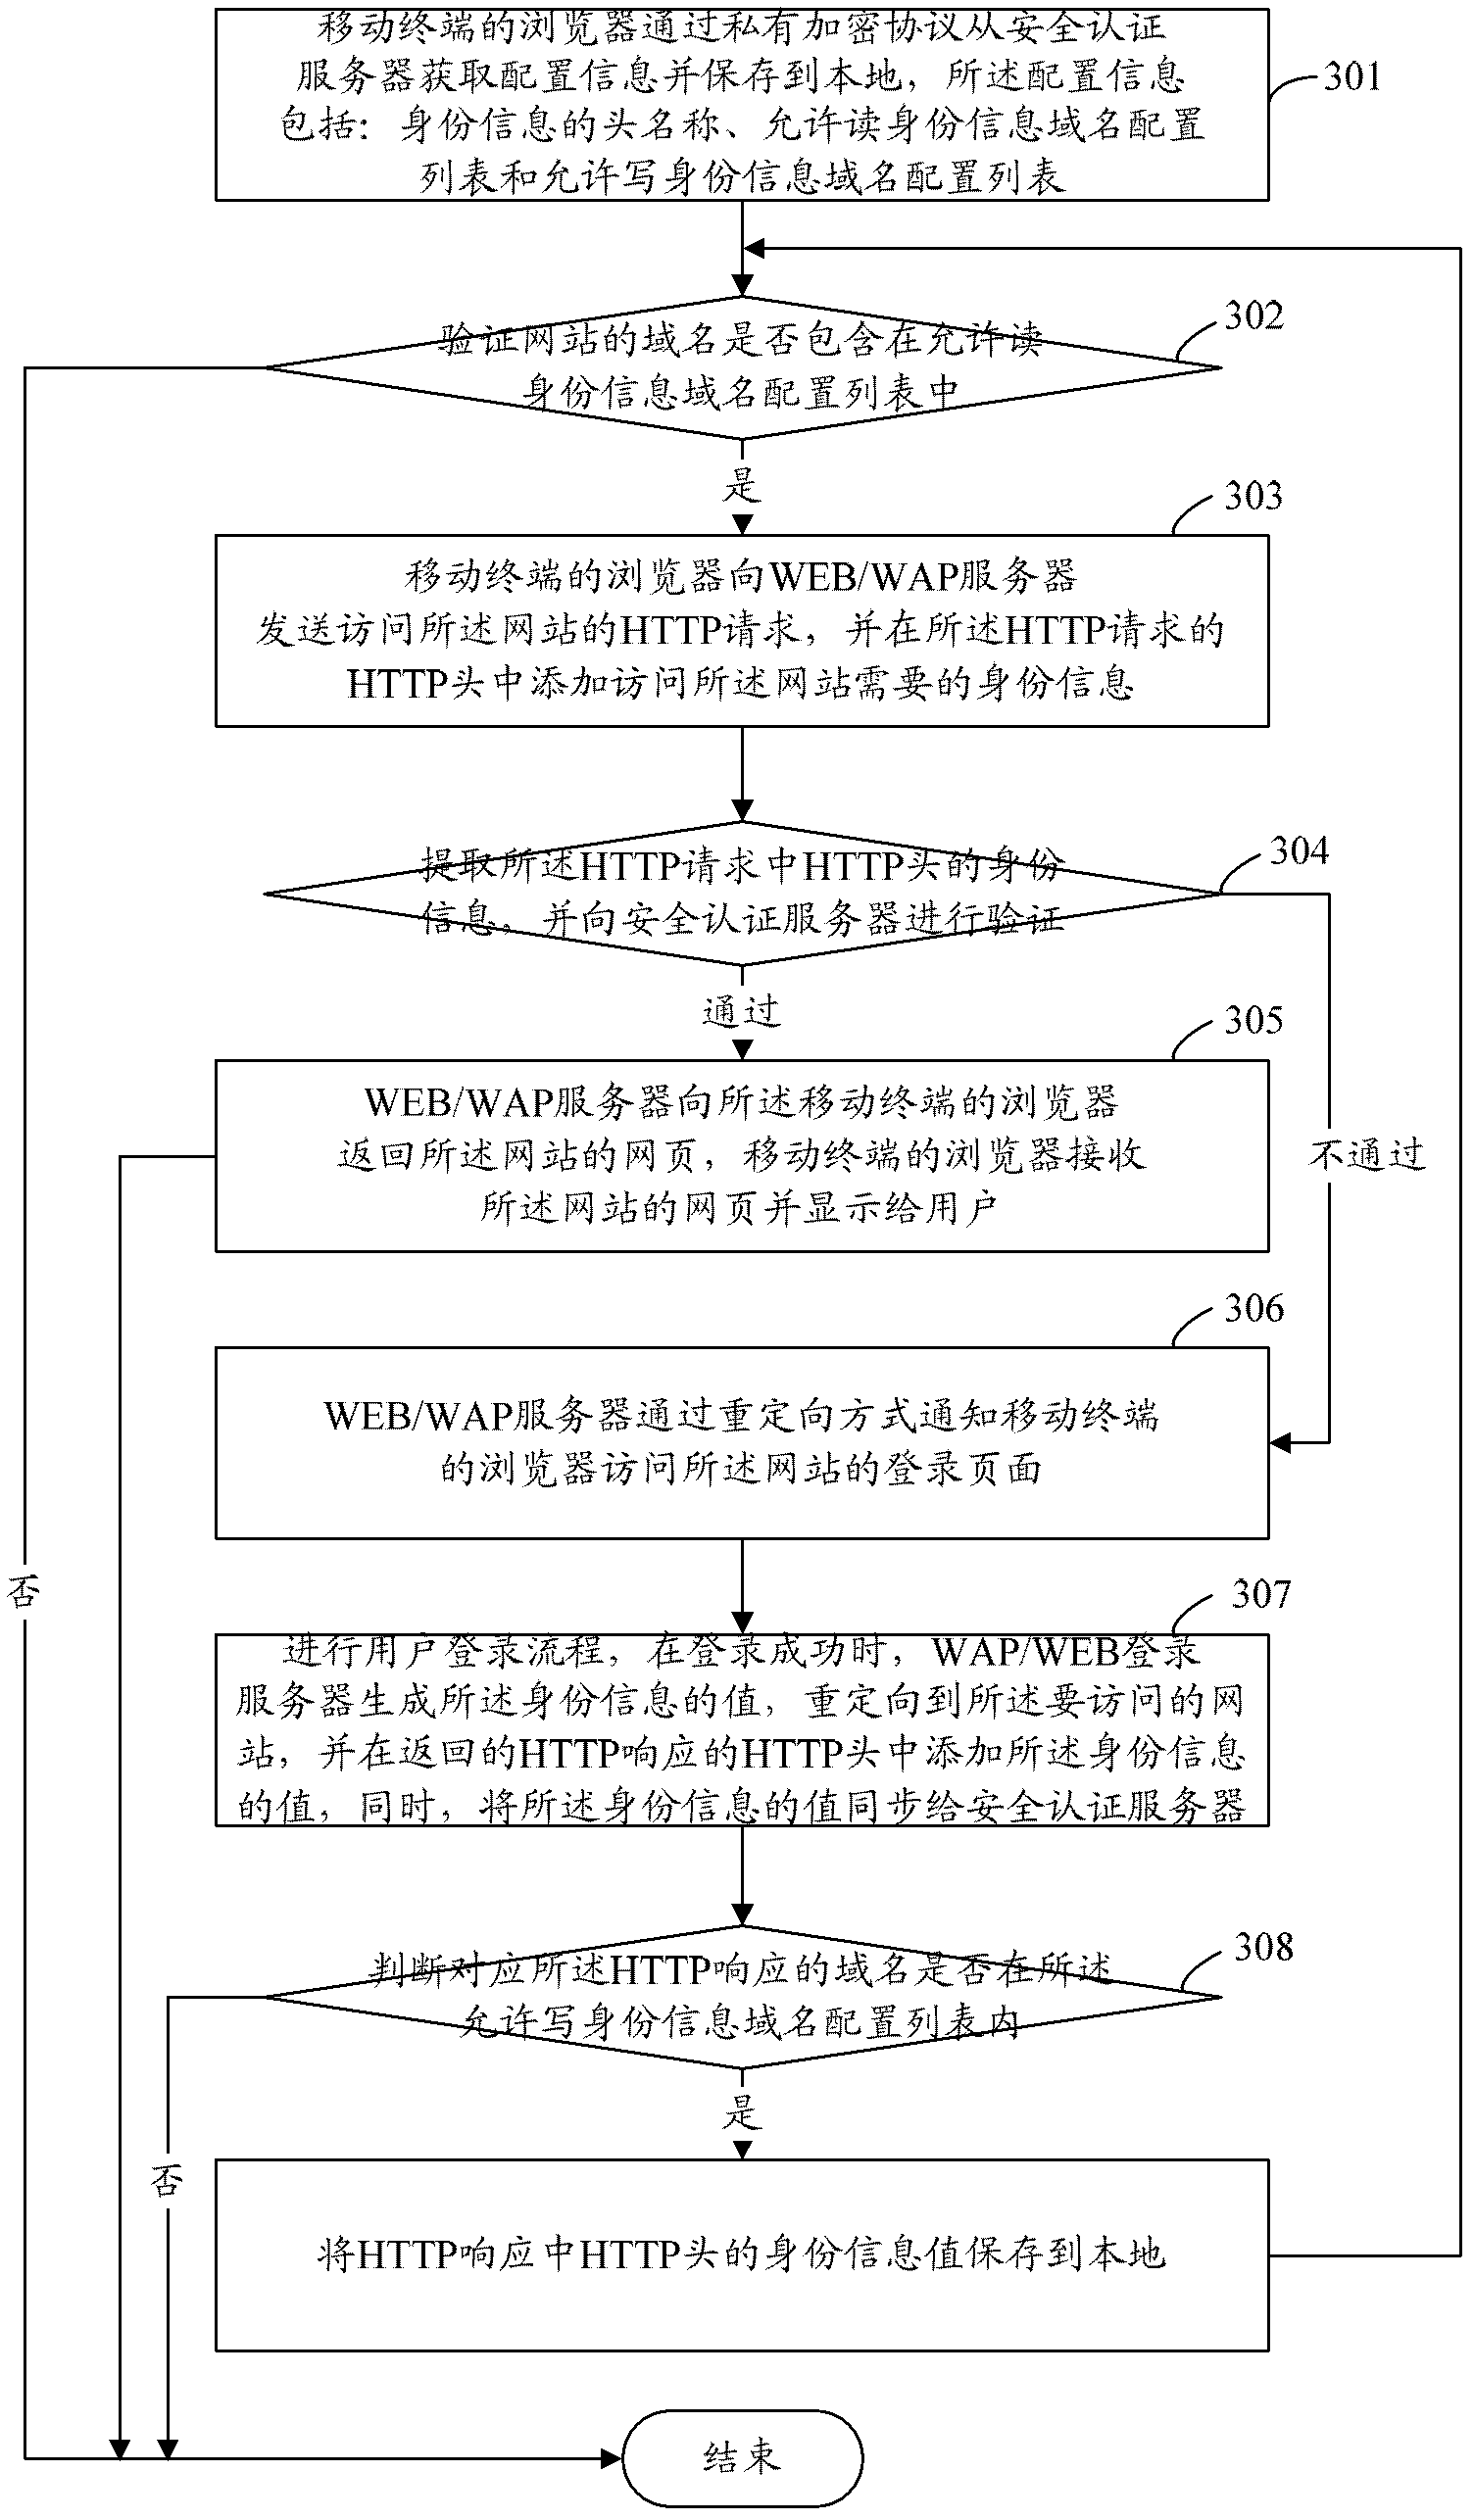 Method and system for accessing internet by mobile terminal